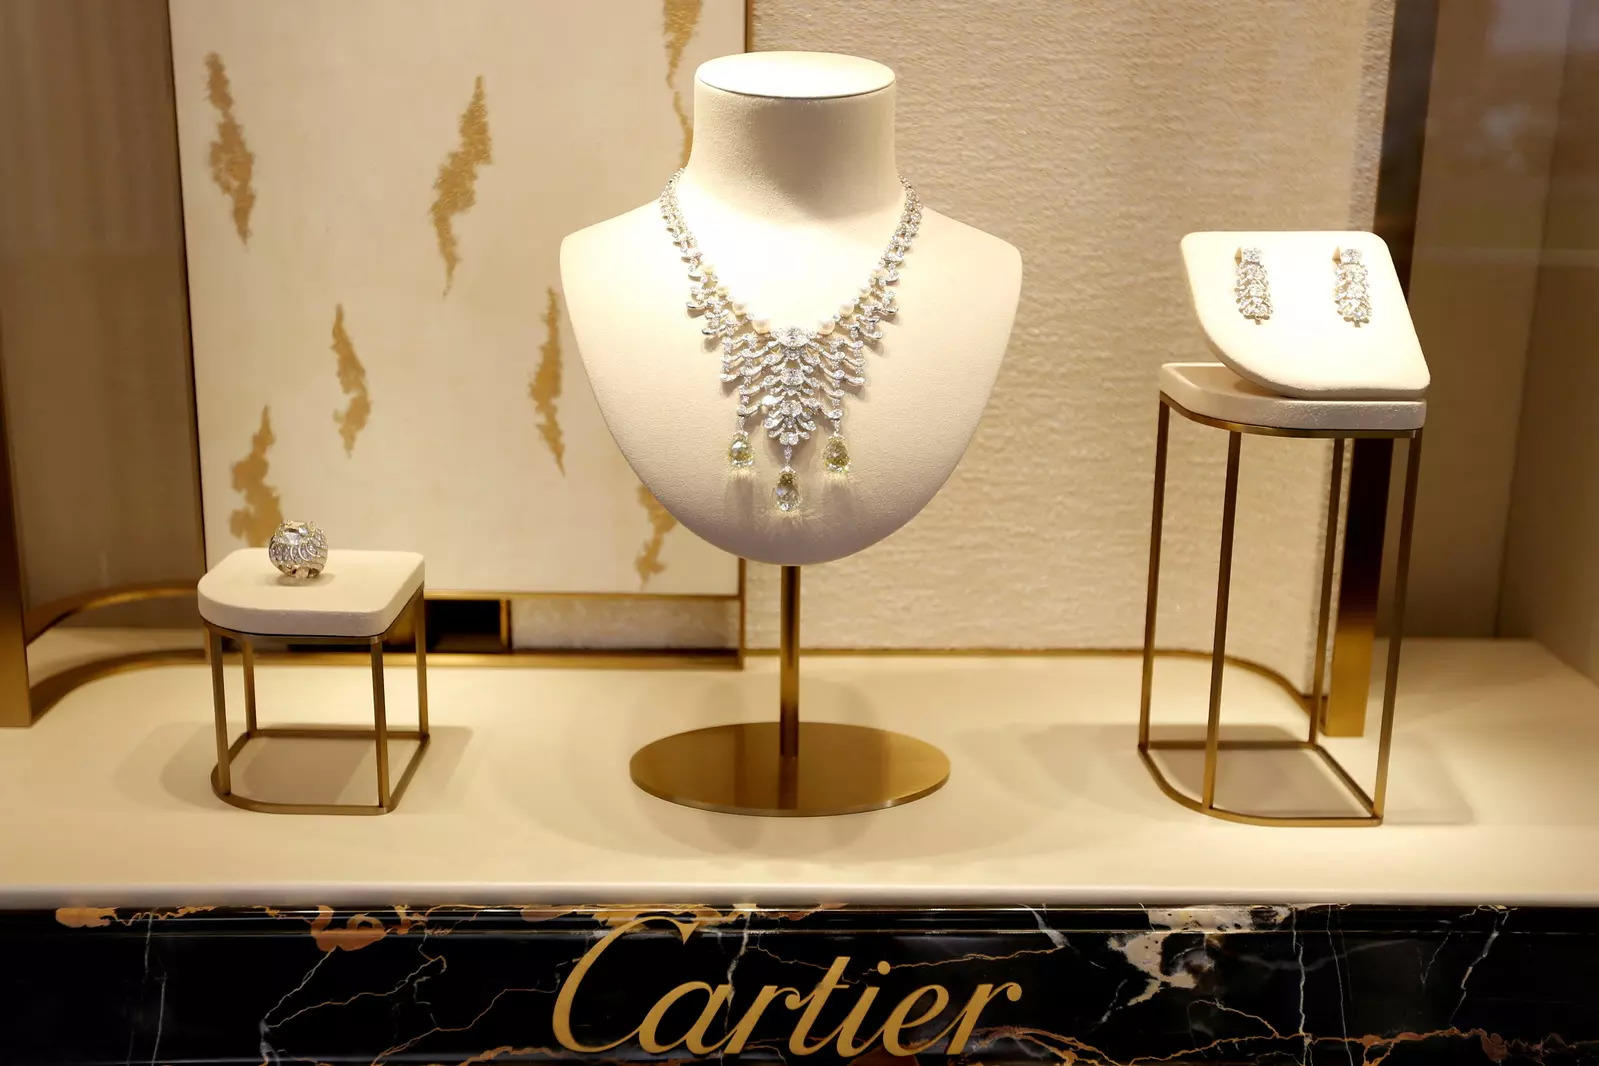 Cartier sues Tiffany for 'high jewellery' trade secrets thefts in the US